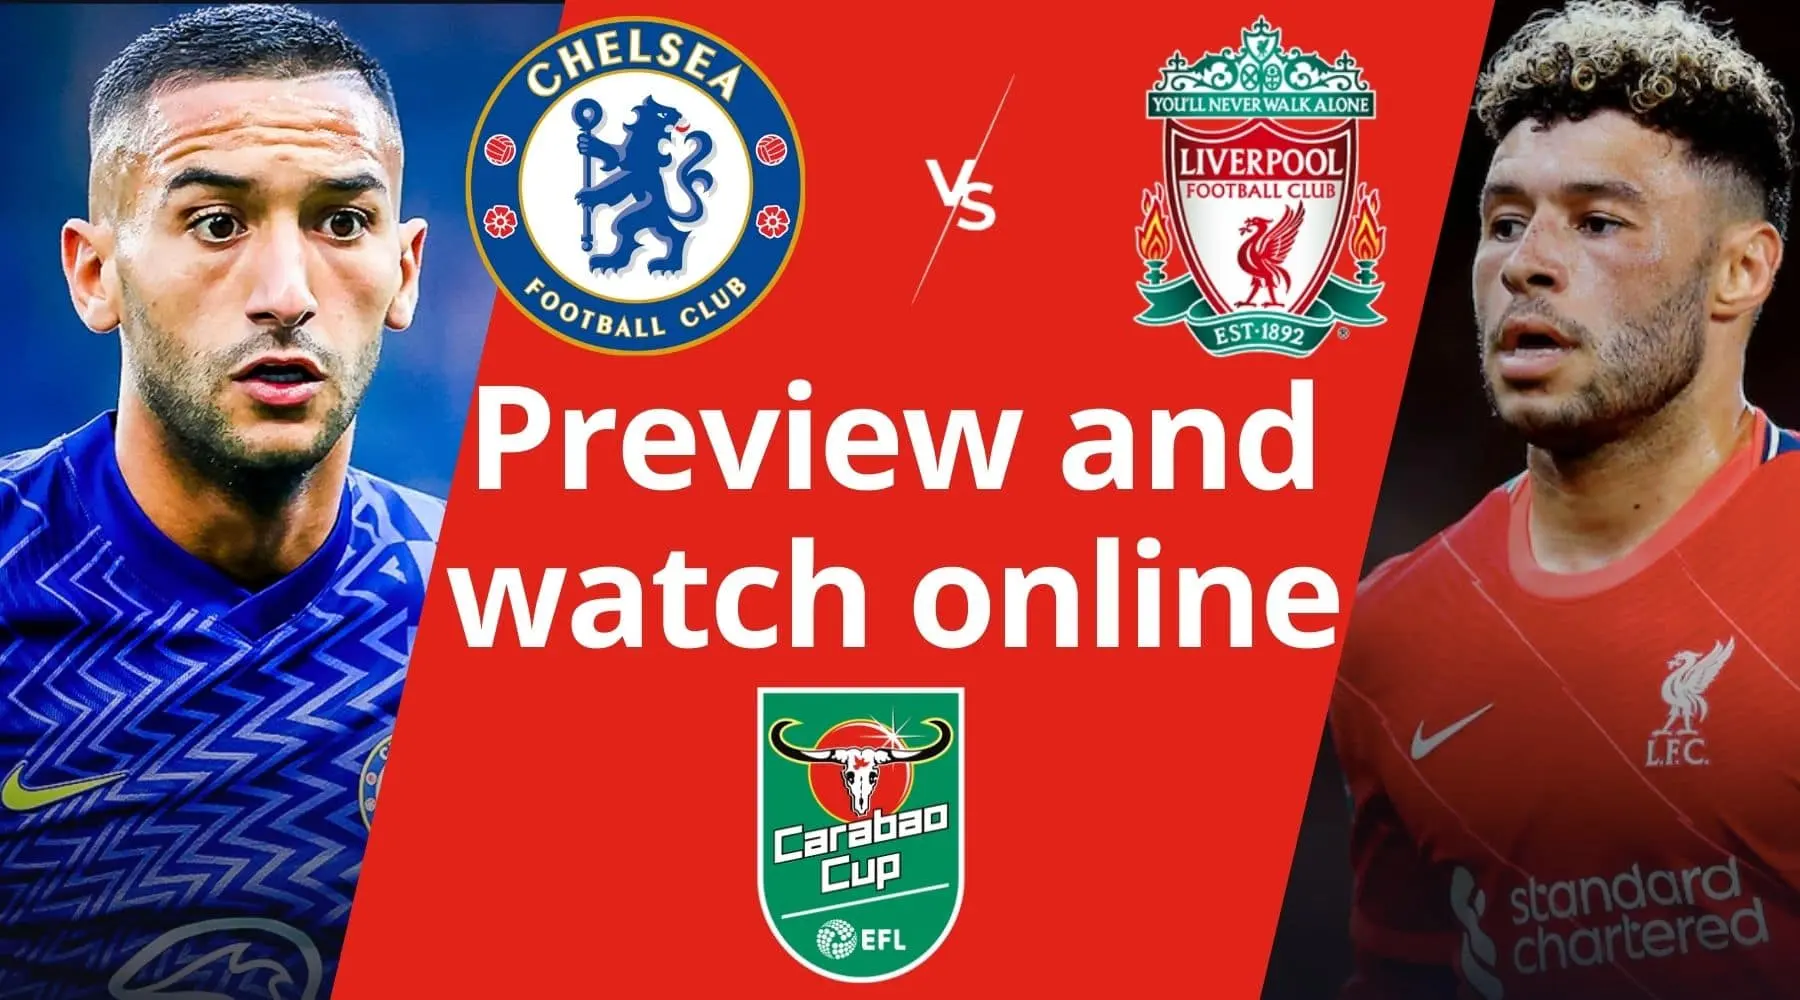 How to watch Chelsea vs Liverpool in the Carabao Cup Final live